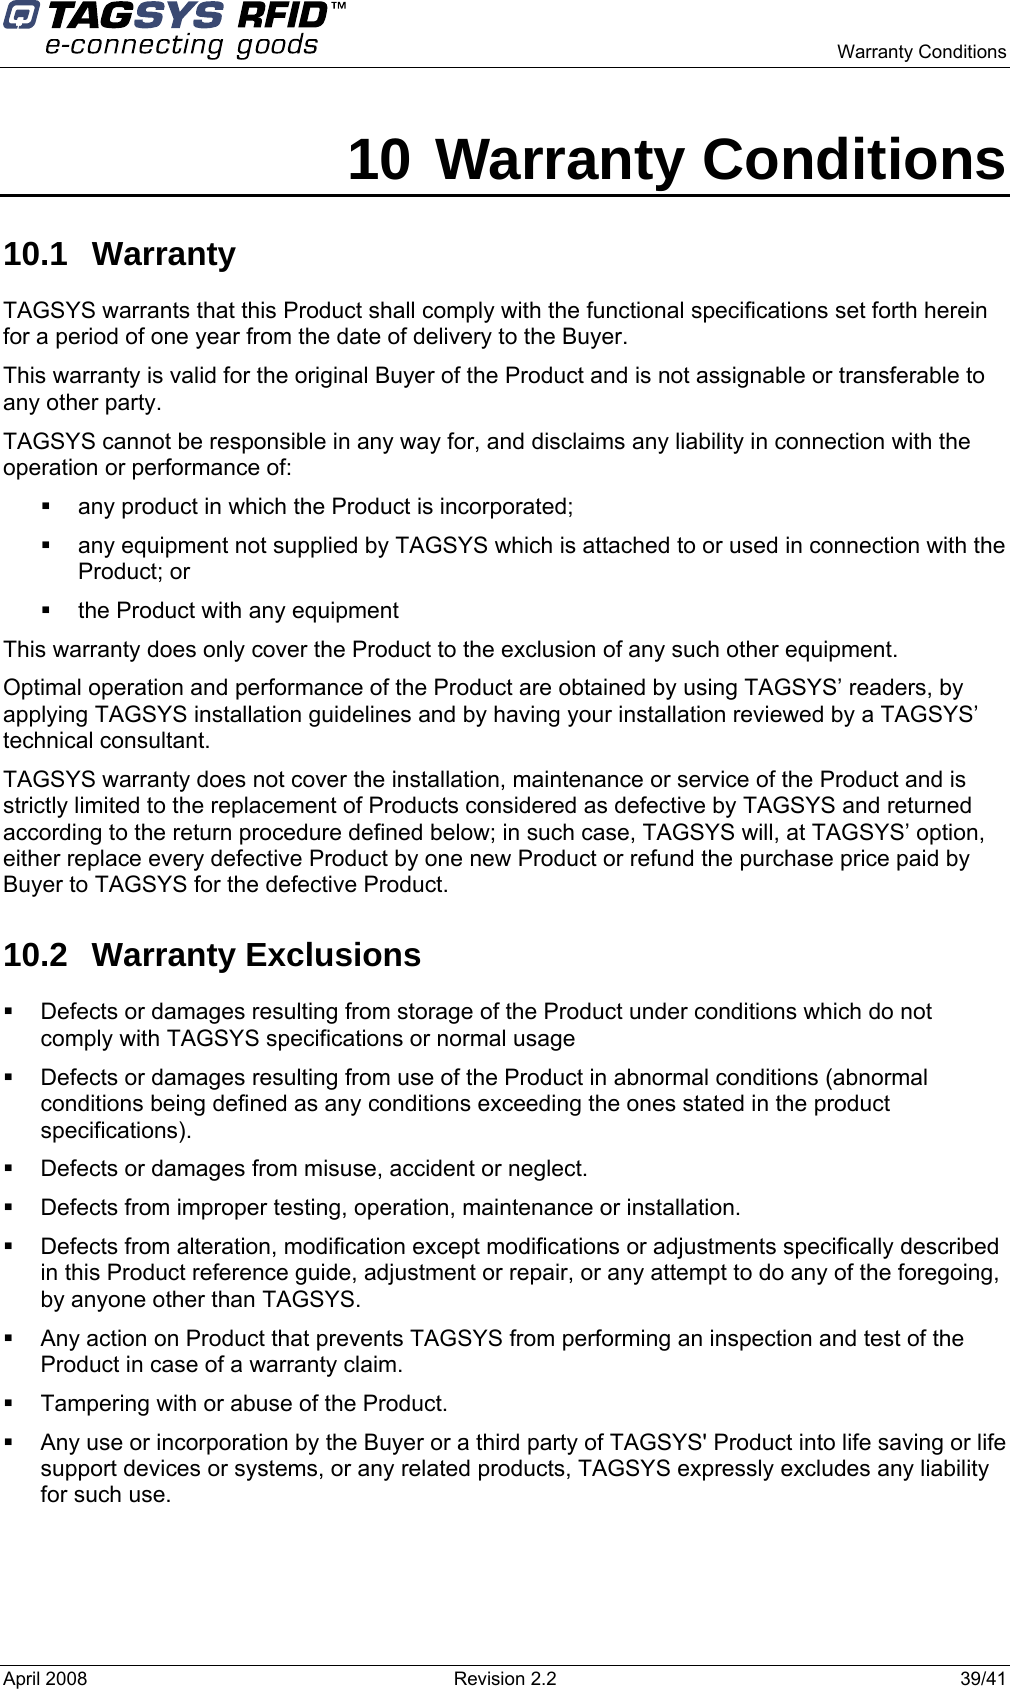    Warranty Conditions  April 2008  Revision 2.2  39/41 10 Warranty Conditions 10.1 Warranty TAGSYS warrants that this Product shall comply with the functional specifications set forth herein for a period of one year from the date of delivery to the Buyer. This warranty is valid for the original Buyer of the Product and is not assignable or transferable to any other party. TAGSYS cannot be responsible in any way for, and disclaims any liability in connection with the operation or performance of:   any product in which the Product is incorporated;   any equipment not supplied by TAGSYS which is attached to or used in connection with the Product; or   the Product with any equipment This warranty does only cover the Product to the exclusion of any such other equipment. Optimal operation and performance of the Product are obtained by using TAGSYS’ readers, by applying TAGSYS installation guidelines and by having your installation reviewed by a TAGSYS’ technical consultant. TAGSYS warranty does not cover the installation, maintenance or service of the Product and is strictly limited to the replacement of Products considered as defective by TAGSYS and returned according to the return procedure defined below; in such case, TAGSYS will, at TAGSYS’ option, either replace every defective Product by one new Product or refund the purchase price paid by Buyer to TAGSYS for the defective Product. 10.2 Warranty Exclusions   Defects or damages resulting from storage of the Product under conditions which do not comply with TAGSYS specifications or normal usage   Defects or damages resulting from use of the Product in abnormal conditions (abnormal conditions being defined as any conditions exceeding the ones stated in the product specifications).   Defects or damages from misuse, accident or neglect.   Defects from improper testing, operation, maintenance or installation.   Defects from alteration, modification except modifications or adjustments specifically described in this Product reference guide, adjustment or repair, or any attempt to do any of the foregoing, by anyone other than TAGSYS.   Any action on Product that prevents TAGSYS from performing an inspection and test of the Product in case of a warranty claim.   Tampering with or abuse of the Product.   Any use or incorporation by the Buyer or a third party of TAGSYS&apos; Product into life saving or life support devices or systems, or any related products, TAGSYS expressly excludes any liability for such use. 